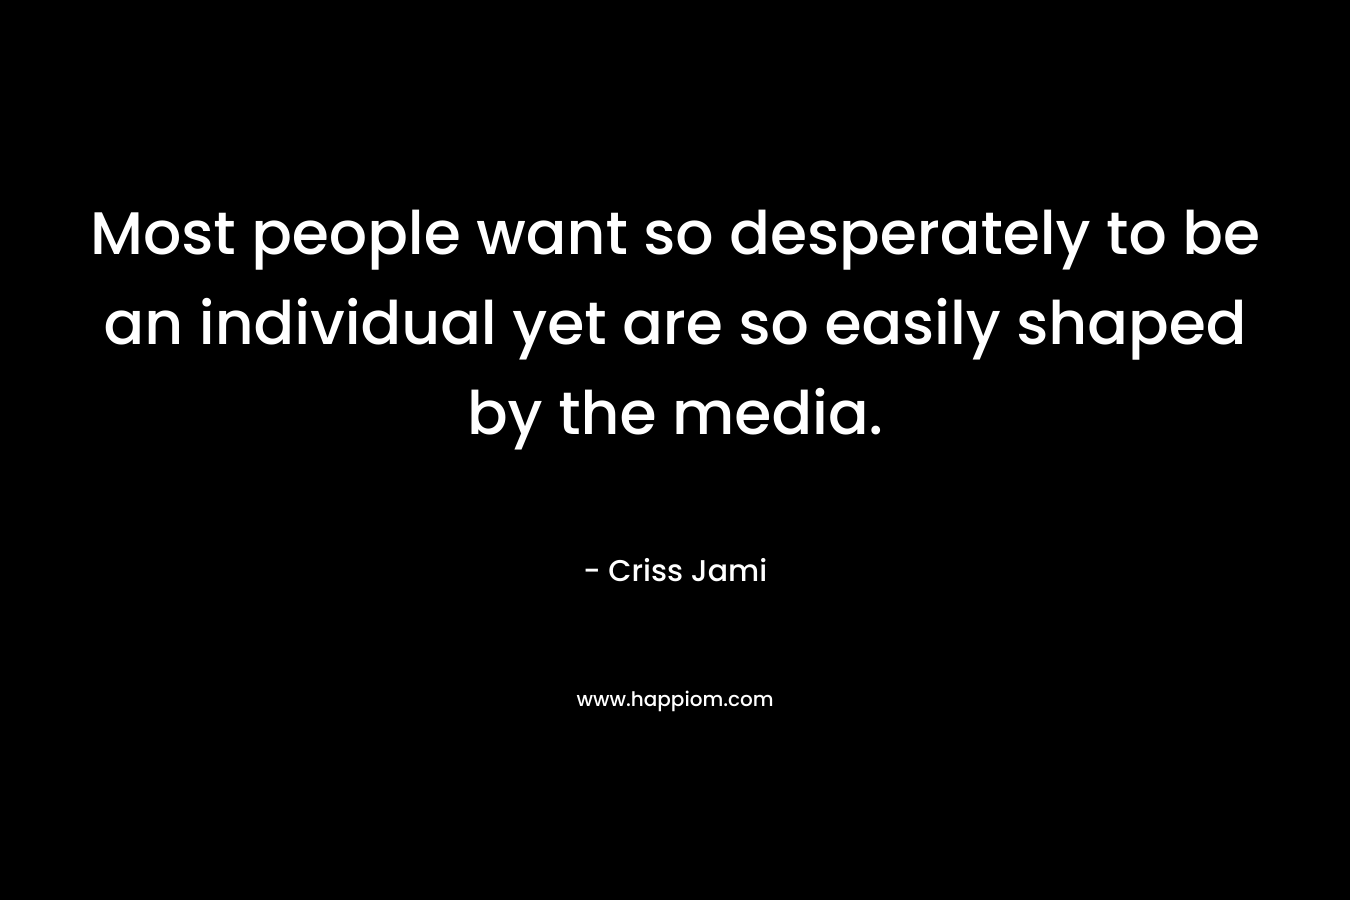 Most people want so desperately to be an individual yet are so easily shaped by the media.